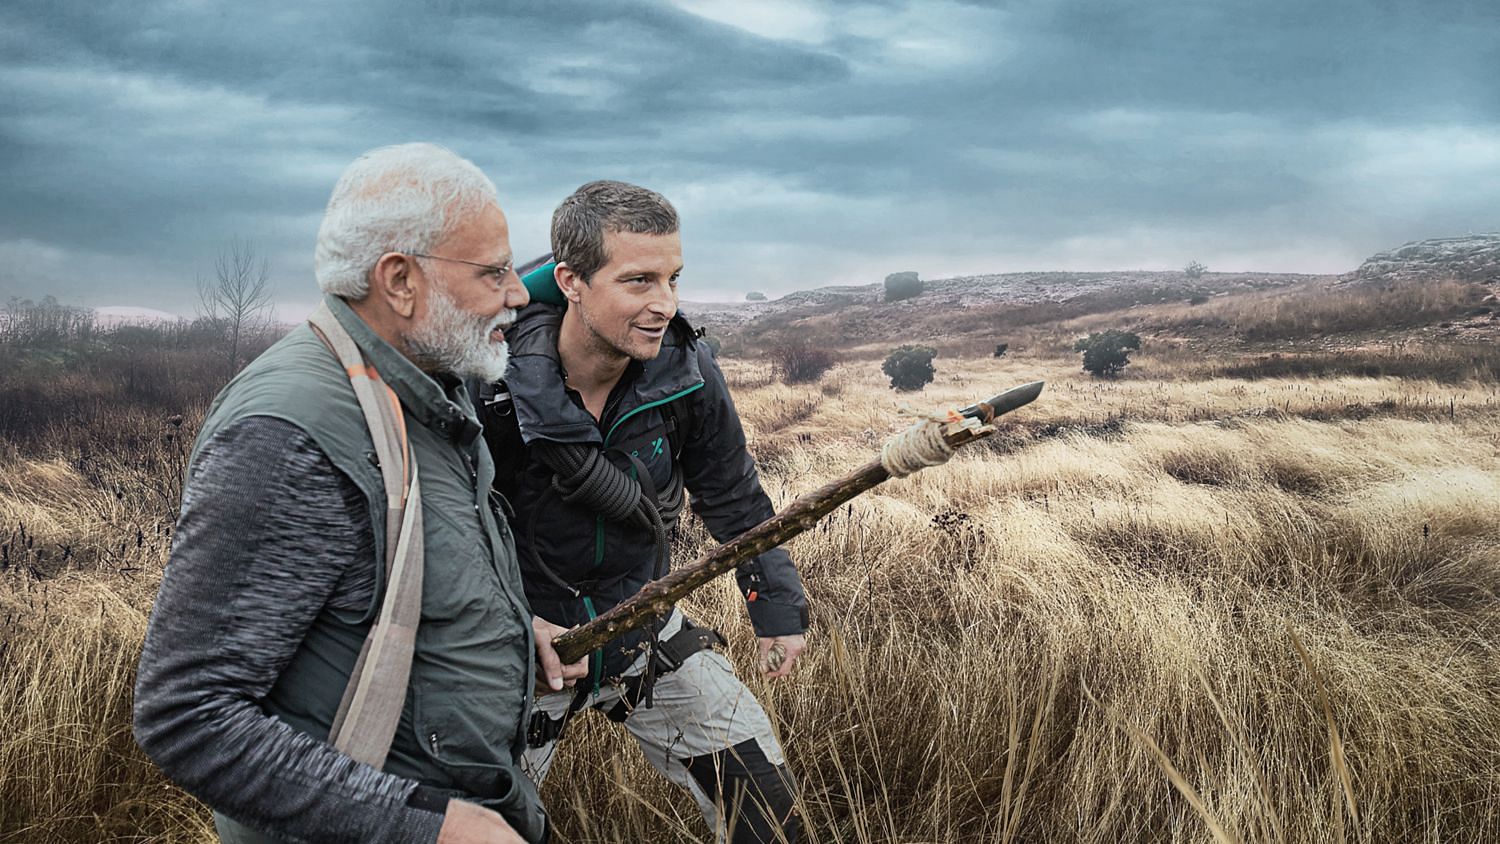 PM Modi and host of ‘Man vs Wild’ Bear Grylls during the shooting of an episode in February.